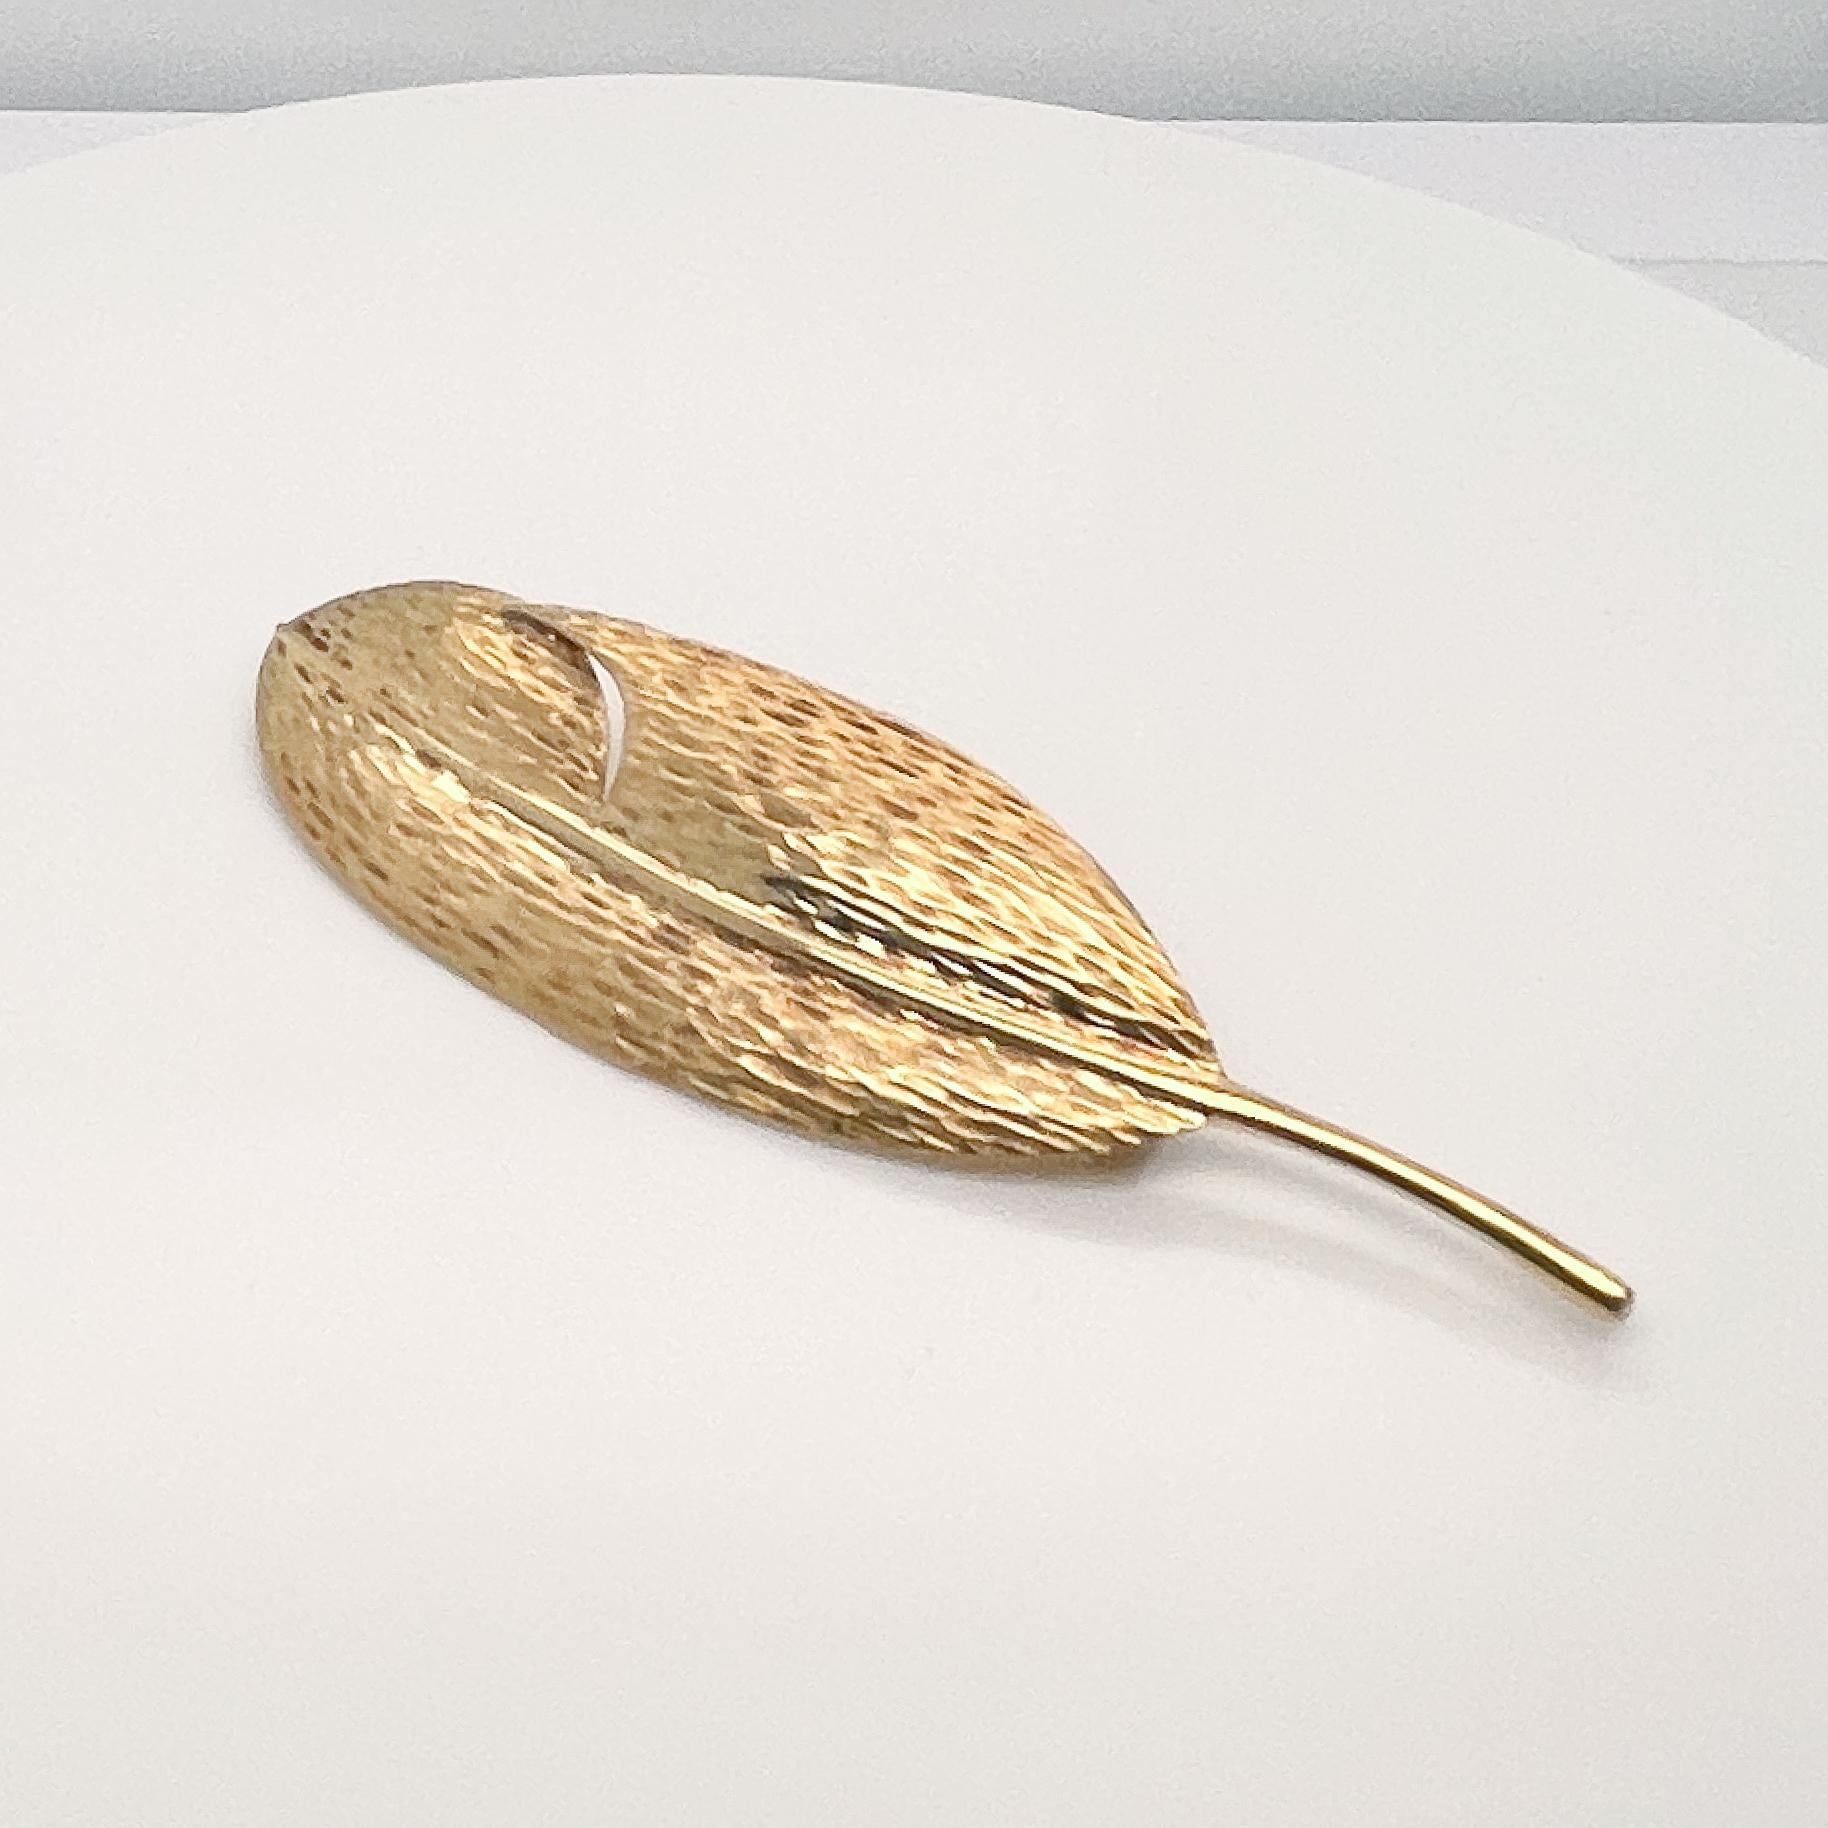 18 Karat Yellow Gold Leaf or Feather Brooch by Angela Cummings for Tiffany & Co. In Good Condition For Sale In Philadelphia, PA